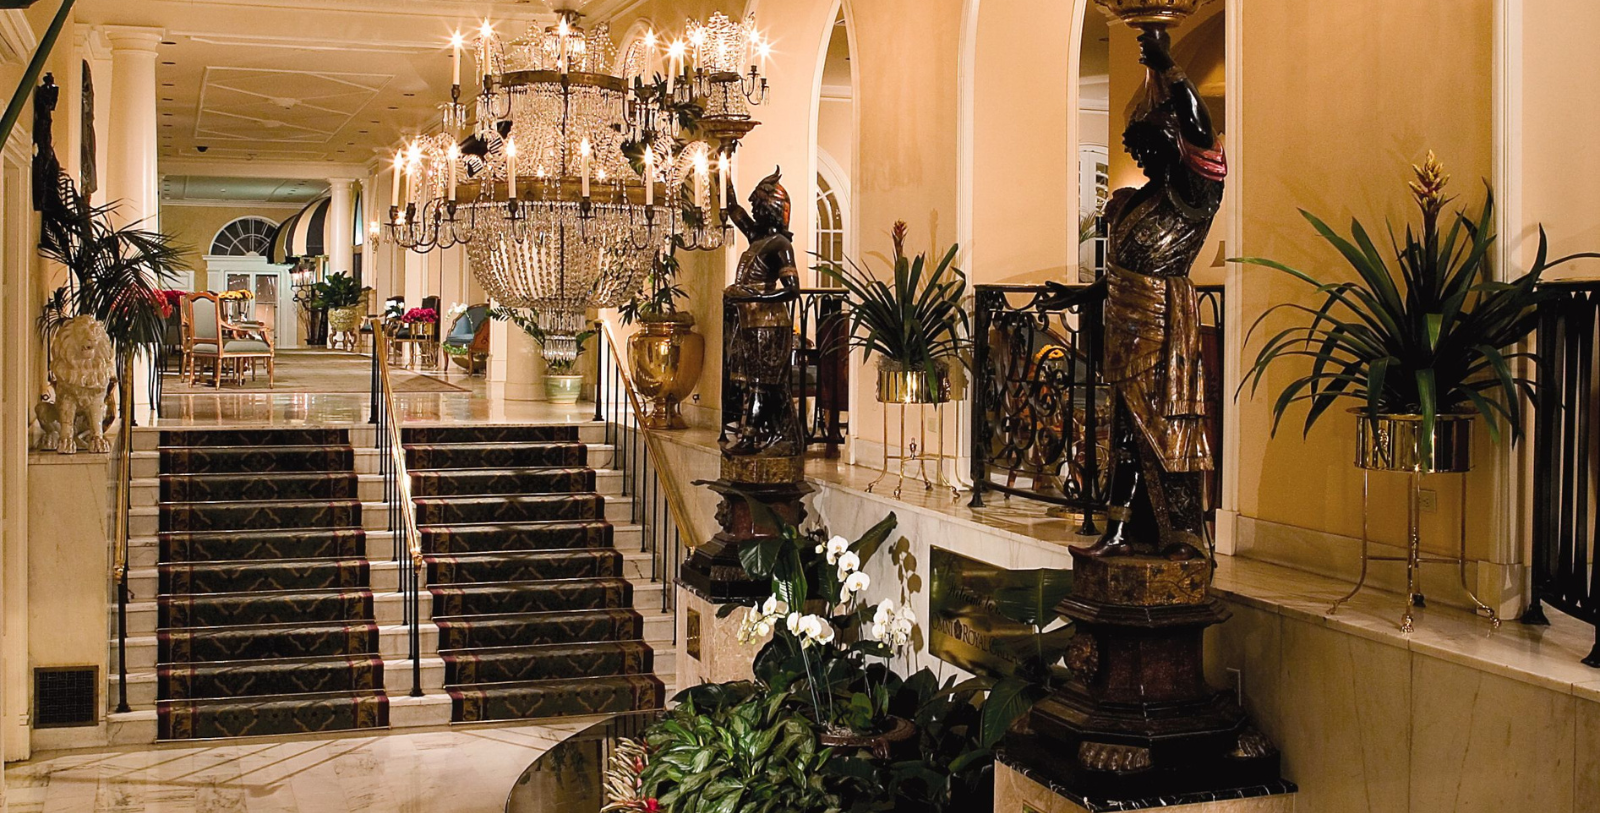 Image of lobby of Omni Royal Orleans, open in 1843, is a member of Historic Hotels of America since 2010